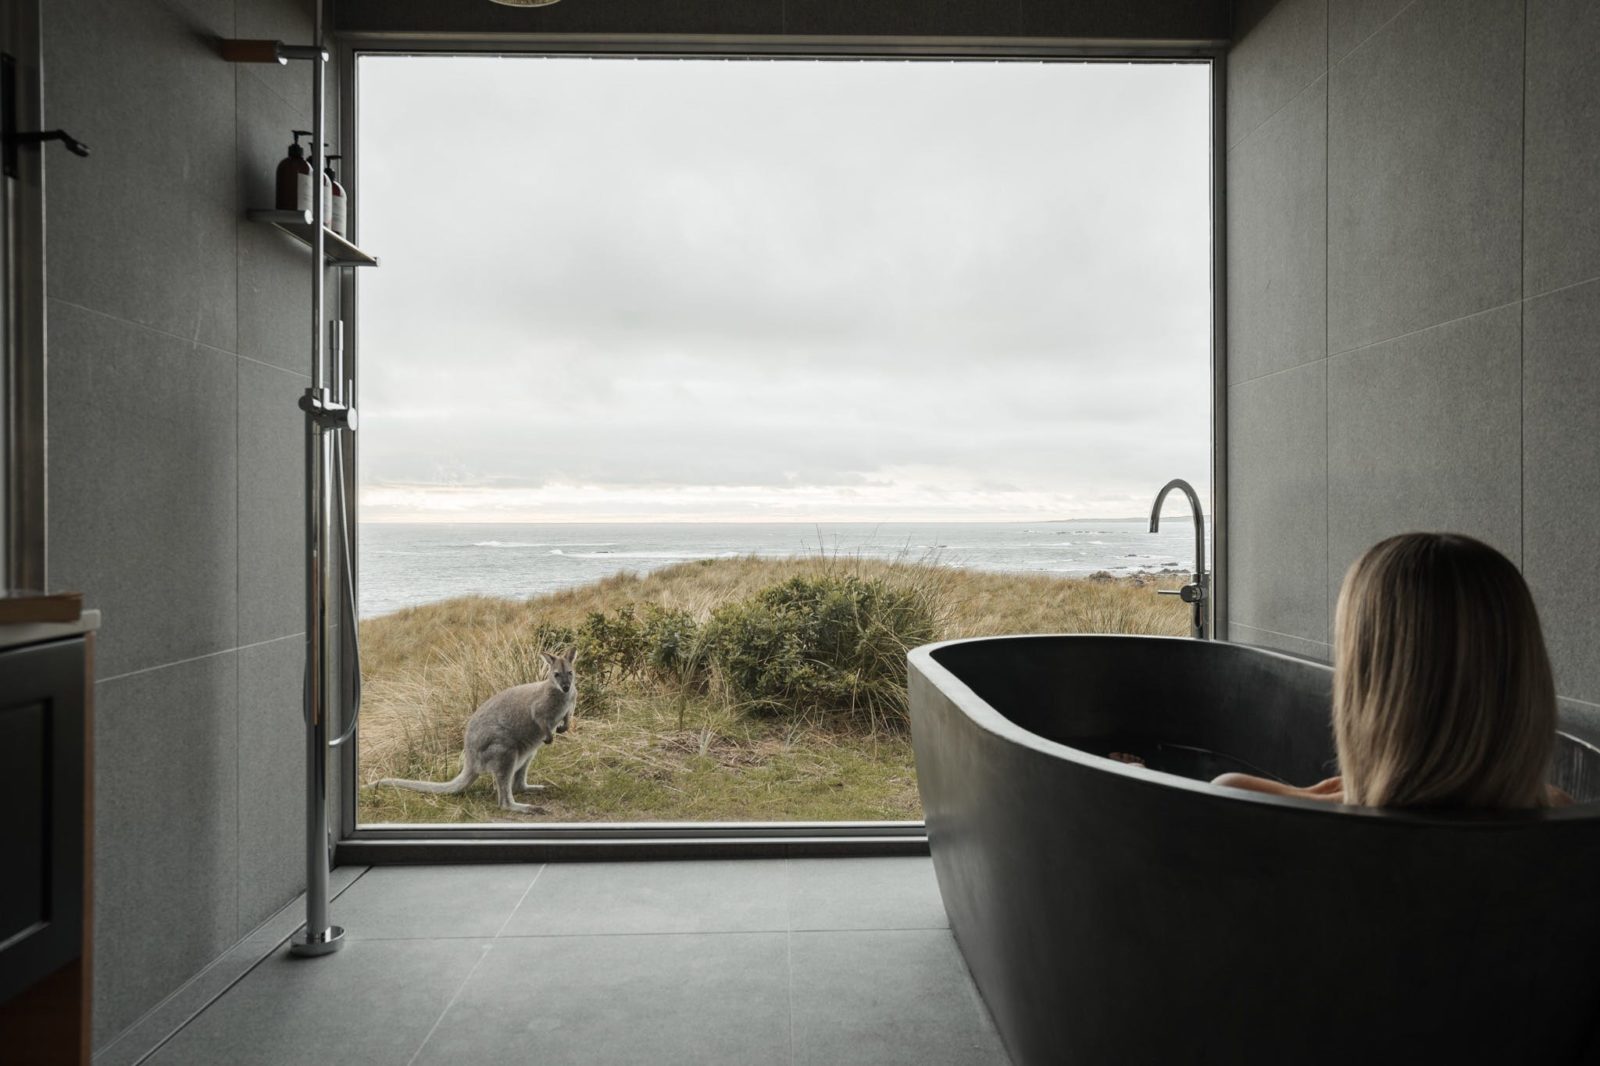 Hand made concrete bath tub with panoramic views through a wall of glass, relax surrounded by nature